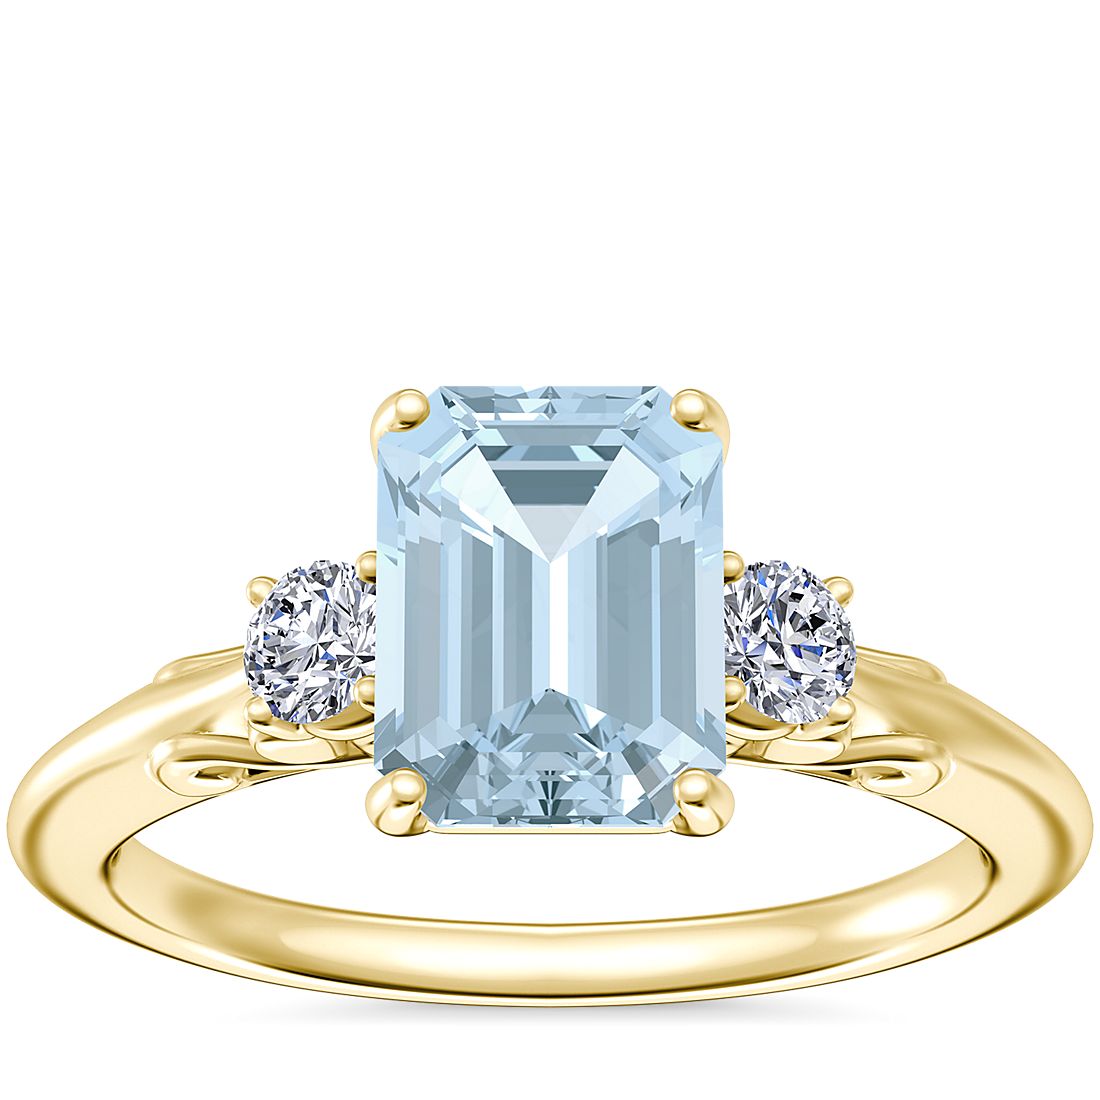 Vintage Three Stone Engagement Ring with Emerald-Cut Aquamarine in 18k Yellow Gold (8x6mm)